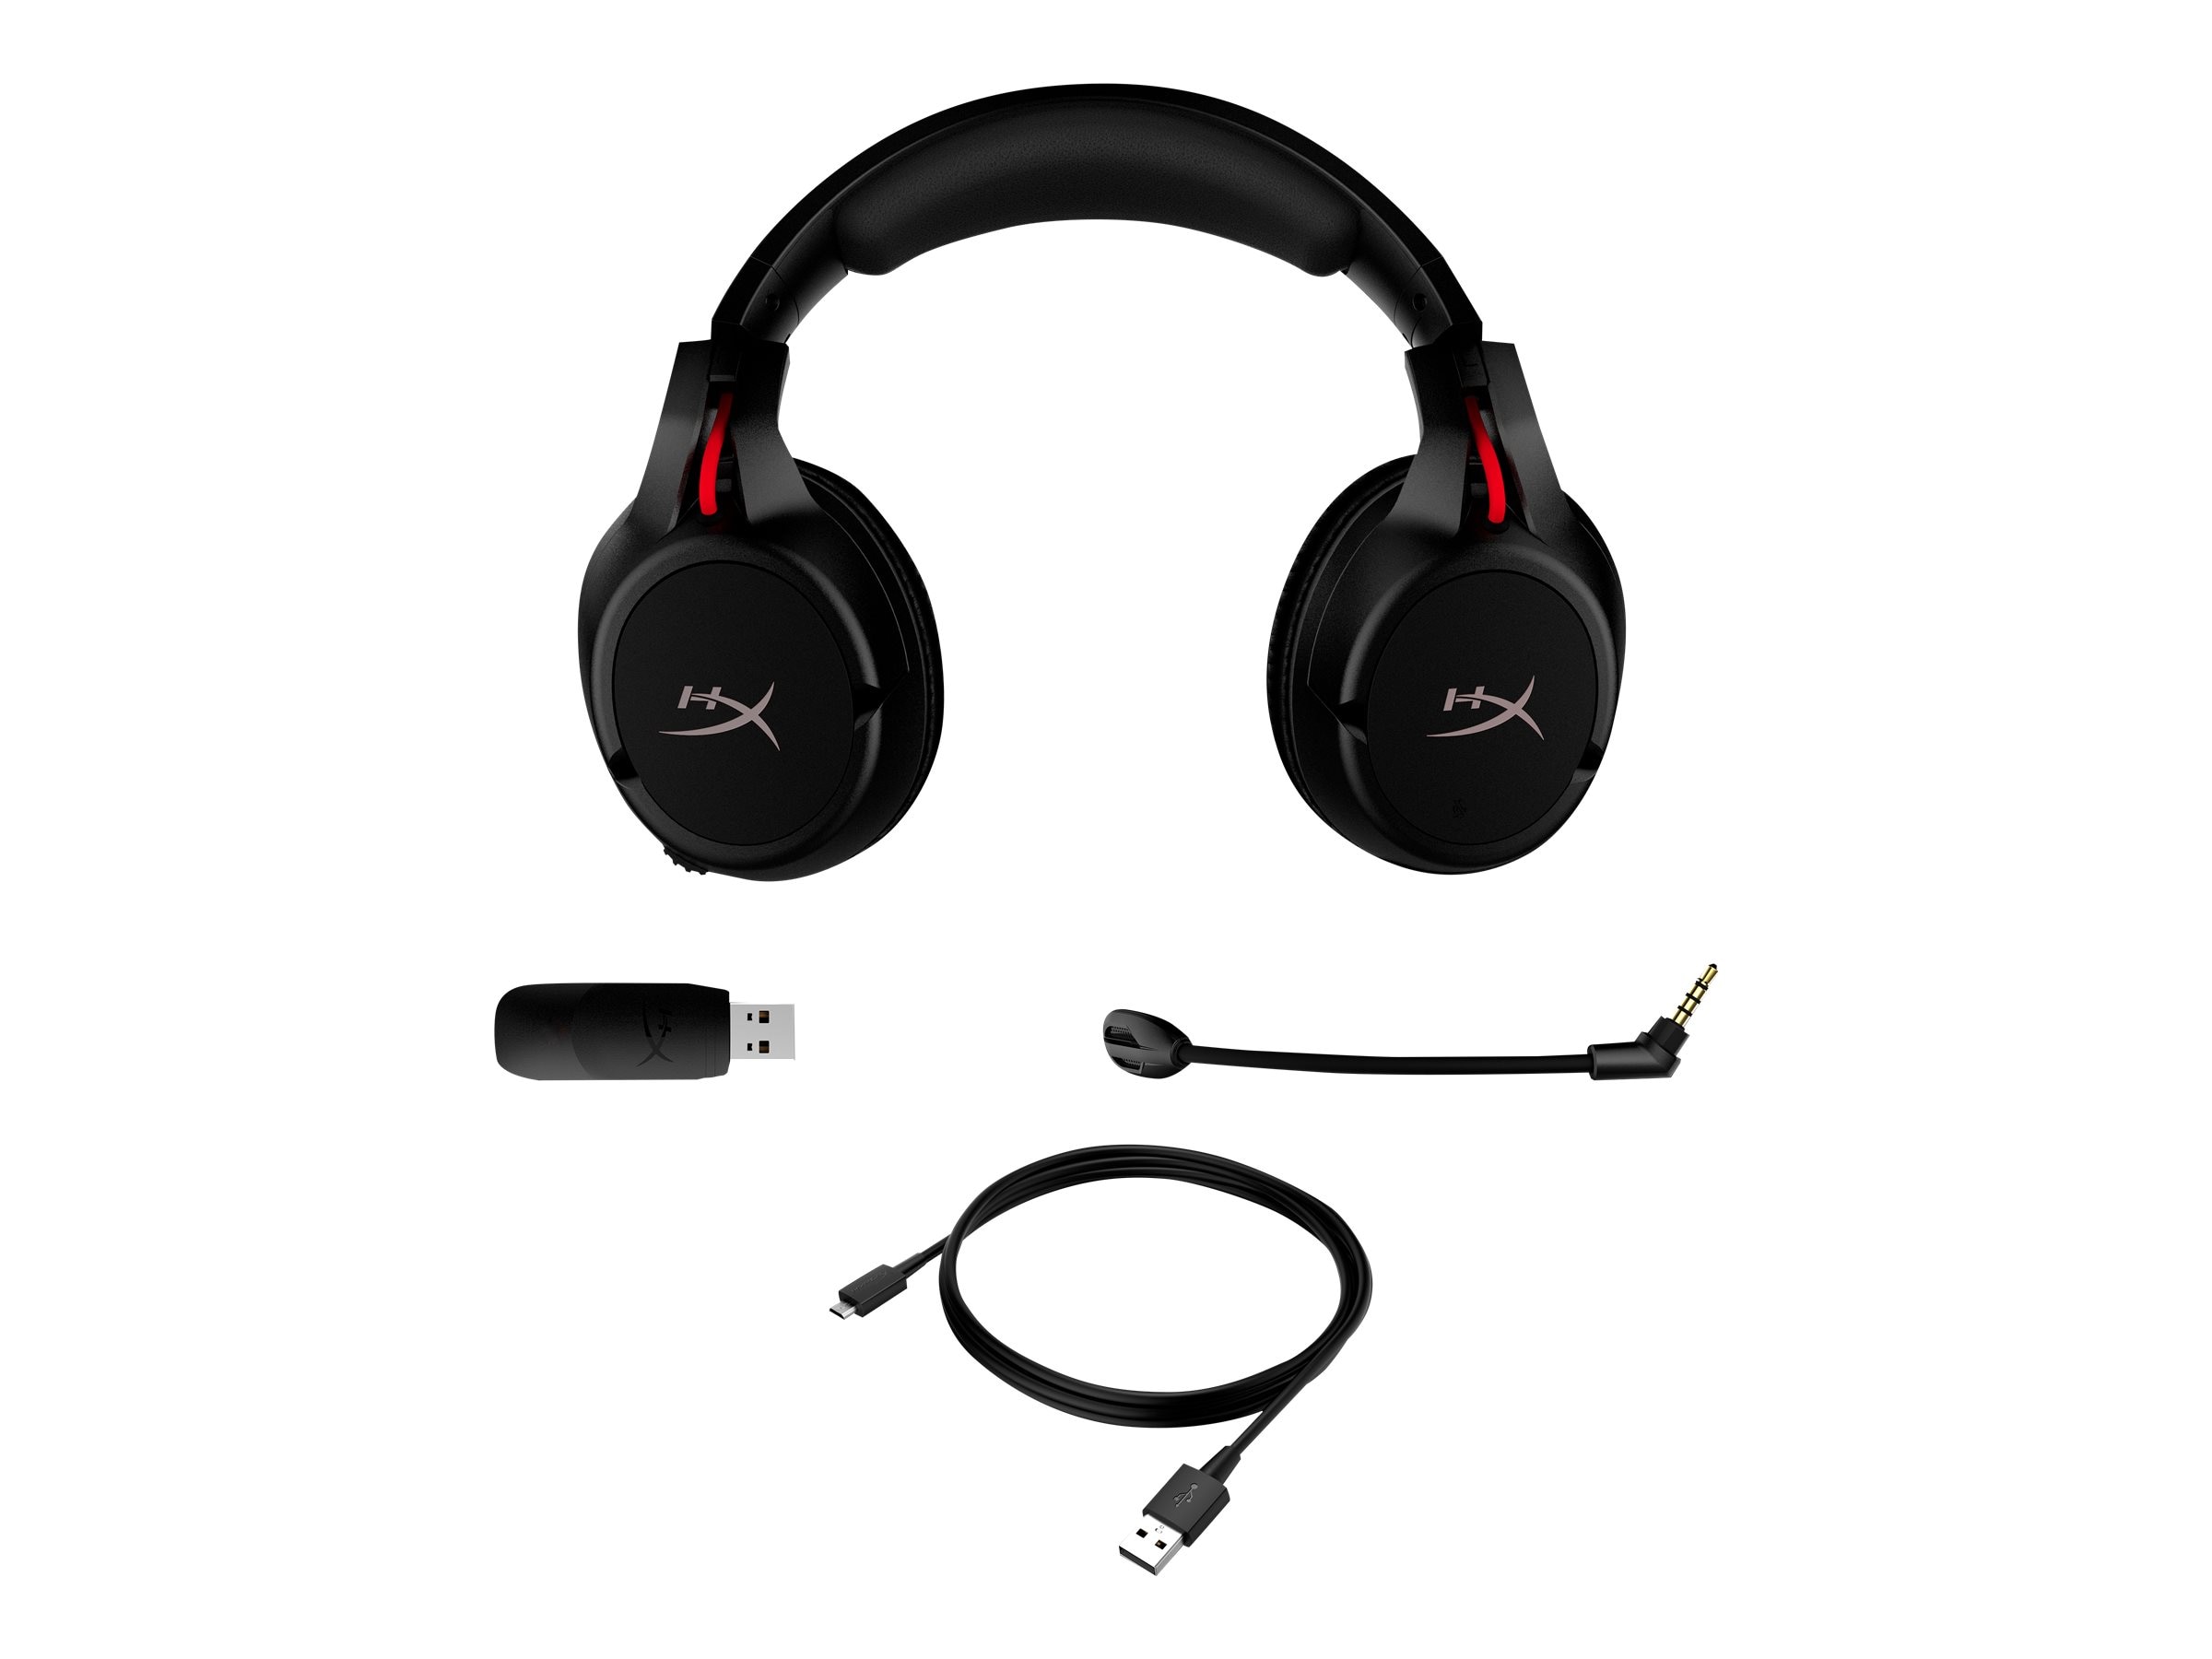 Buy HP HyperX Cloud Flight - Wireless Gaming Headset (Black-Red) at  Connection Public Sector Solutions